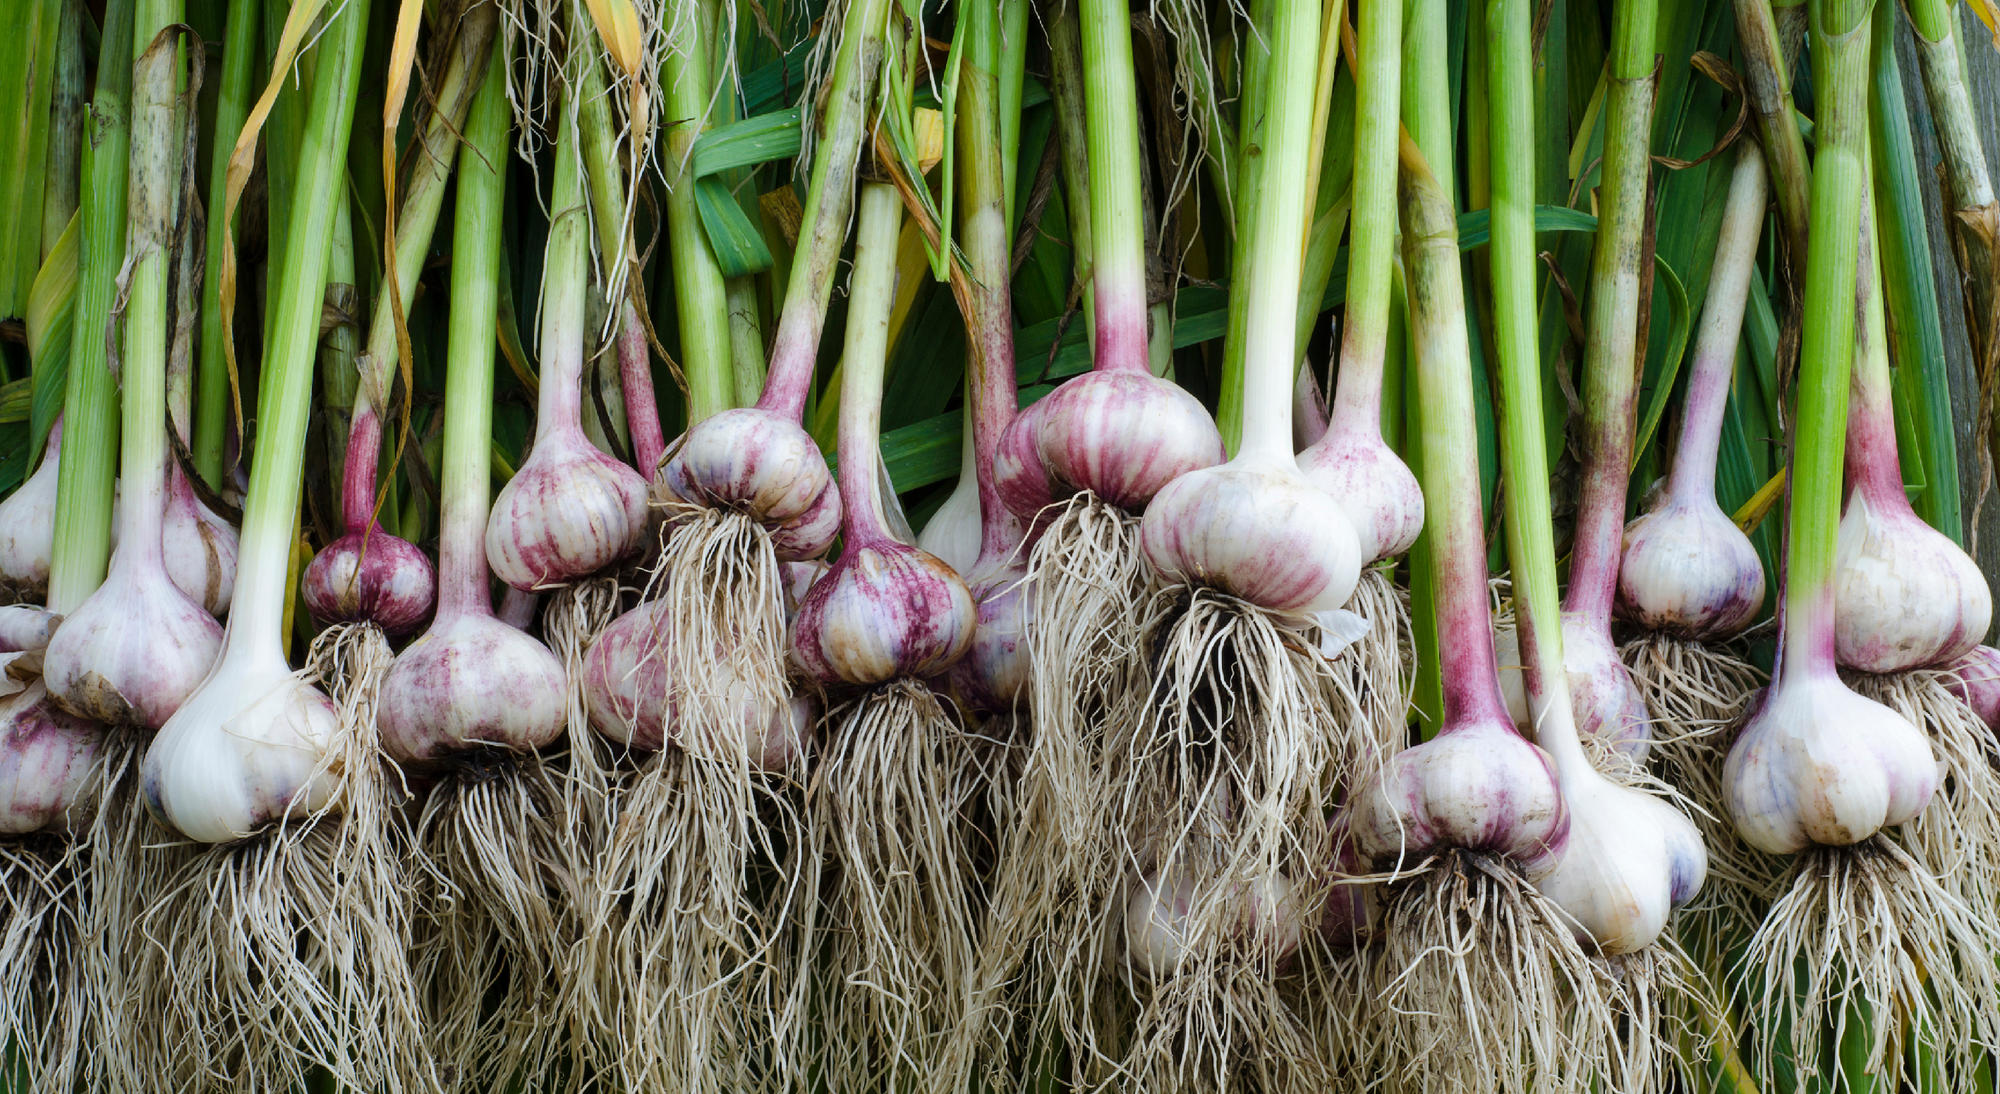 A photo of a bunch of recently harvested garlic bulbs.